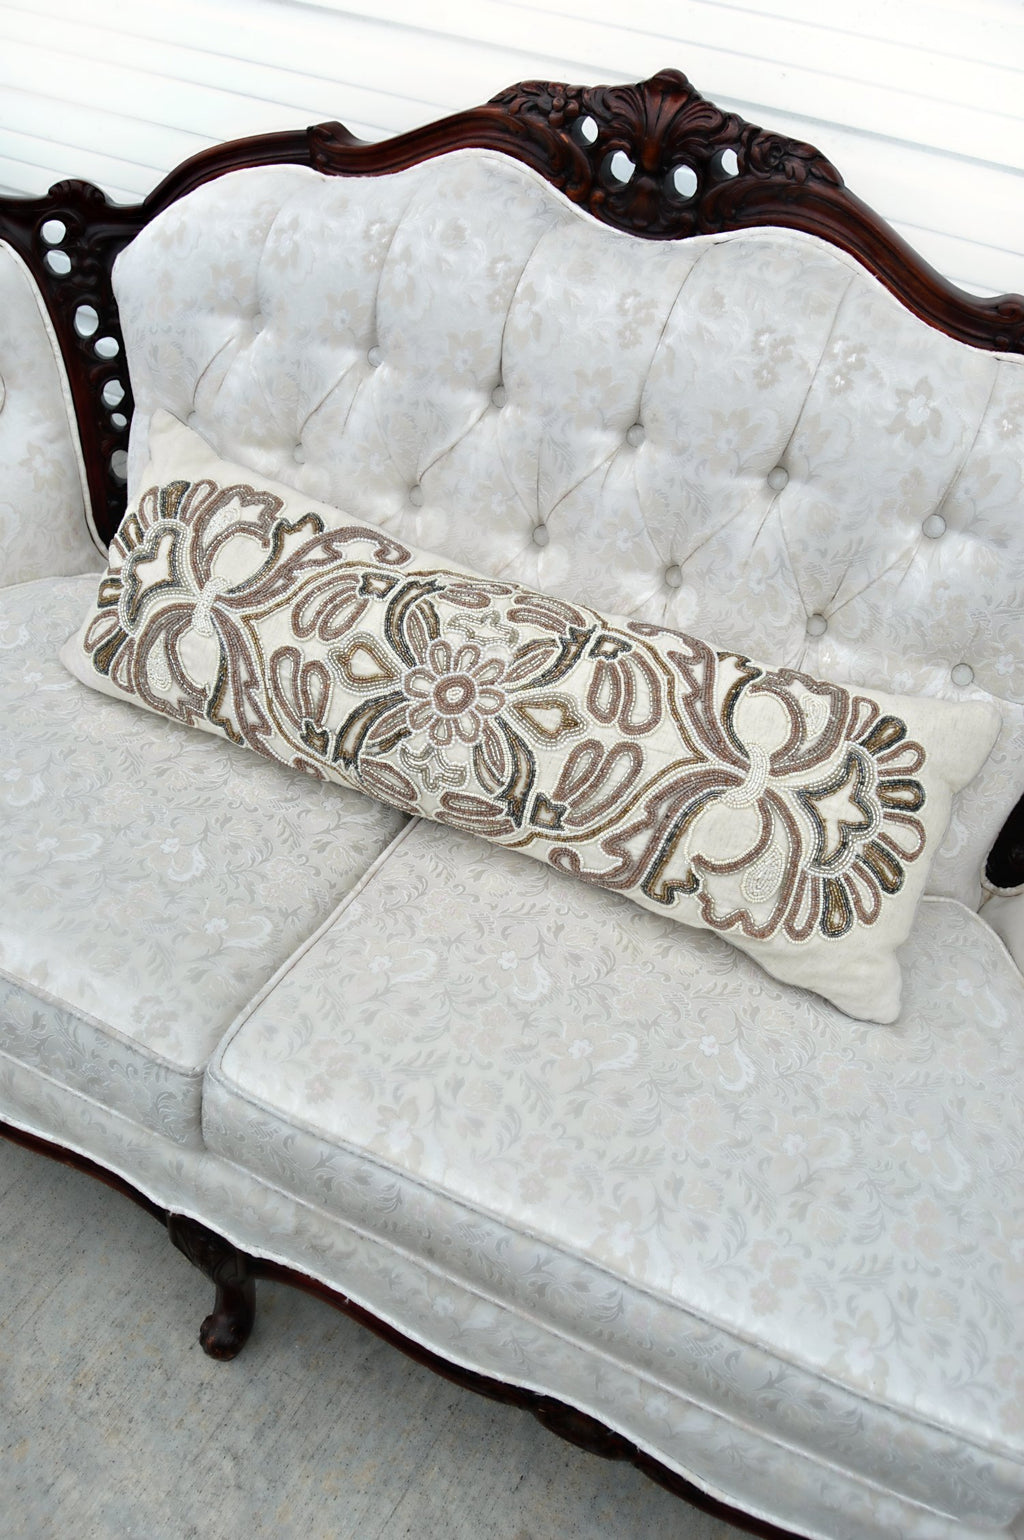 Ivory pillow with light purple, bronze, grey, and white beads